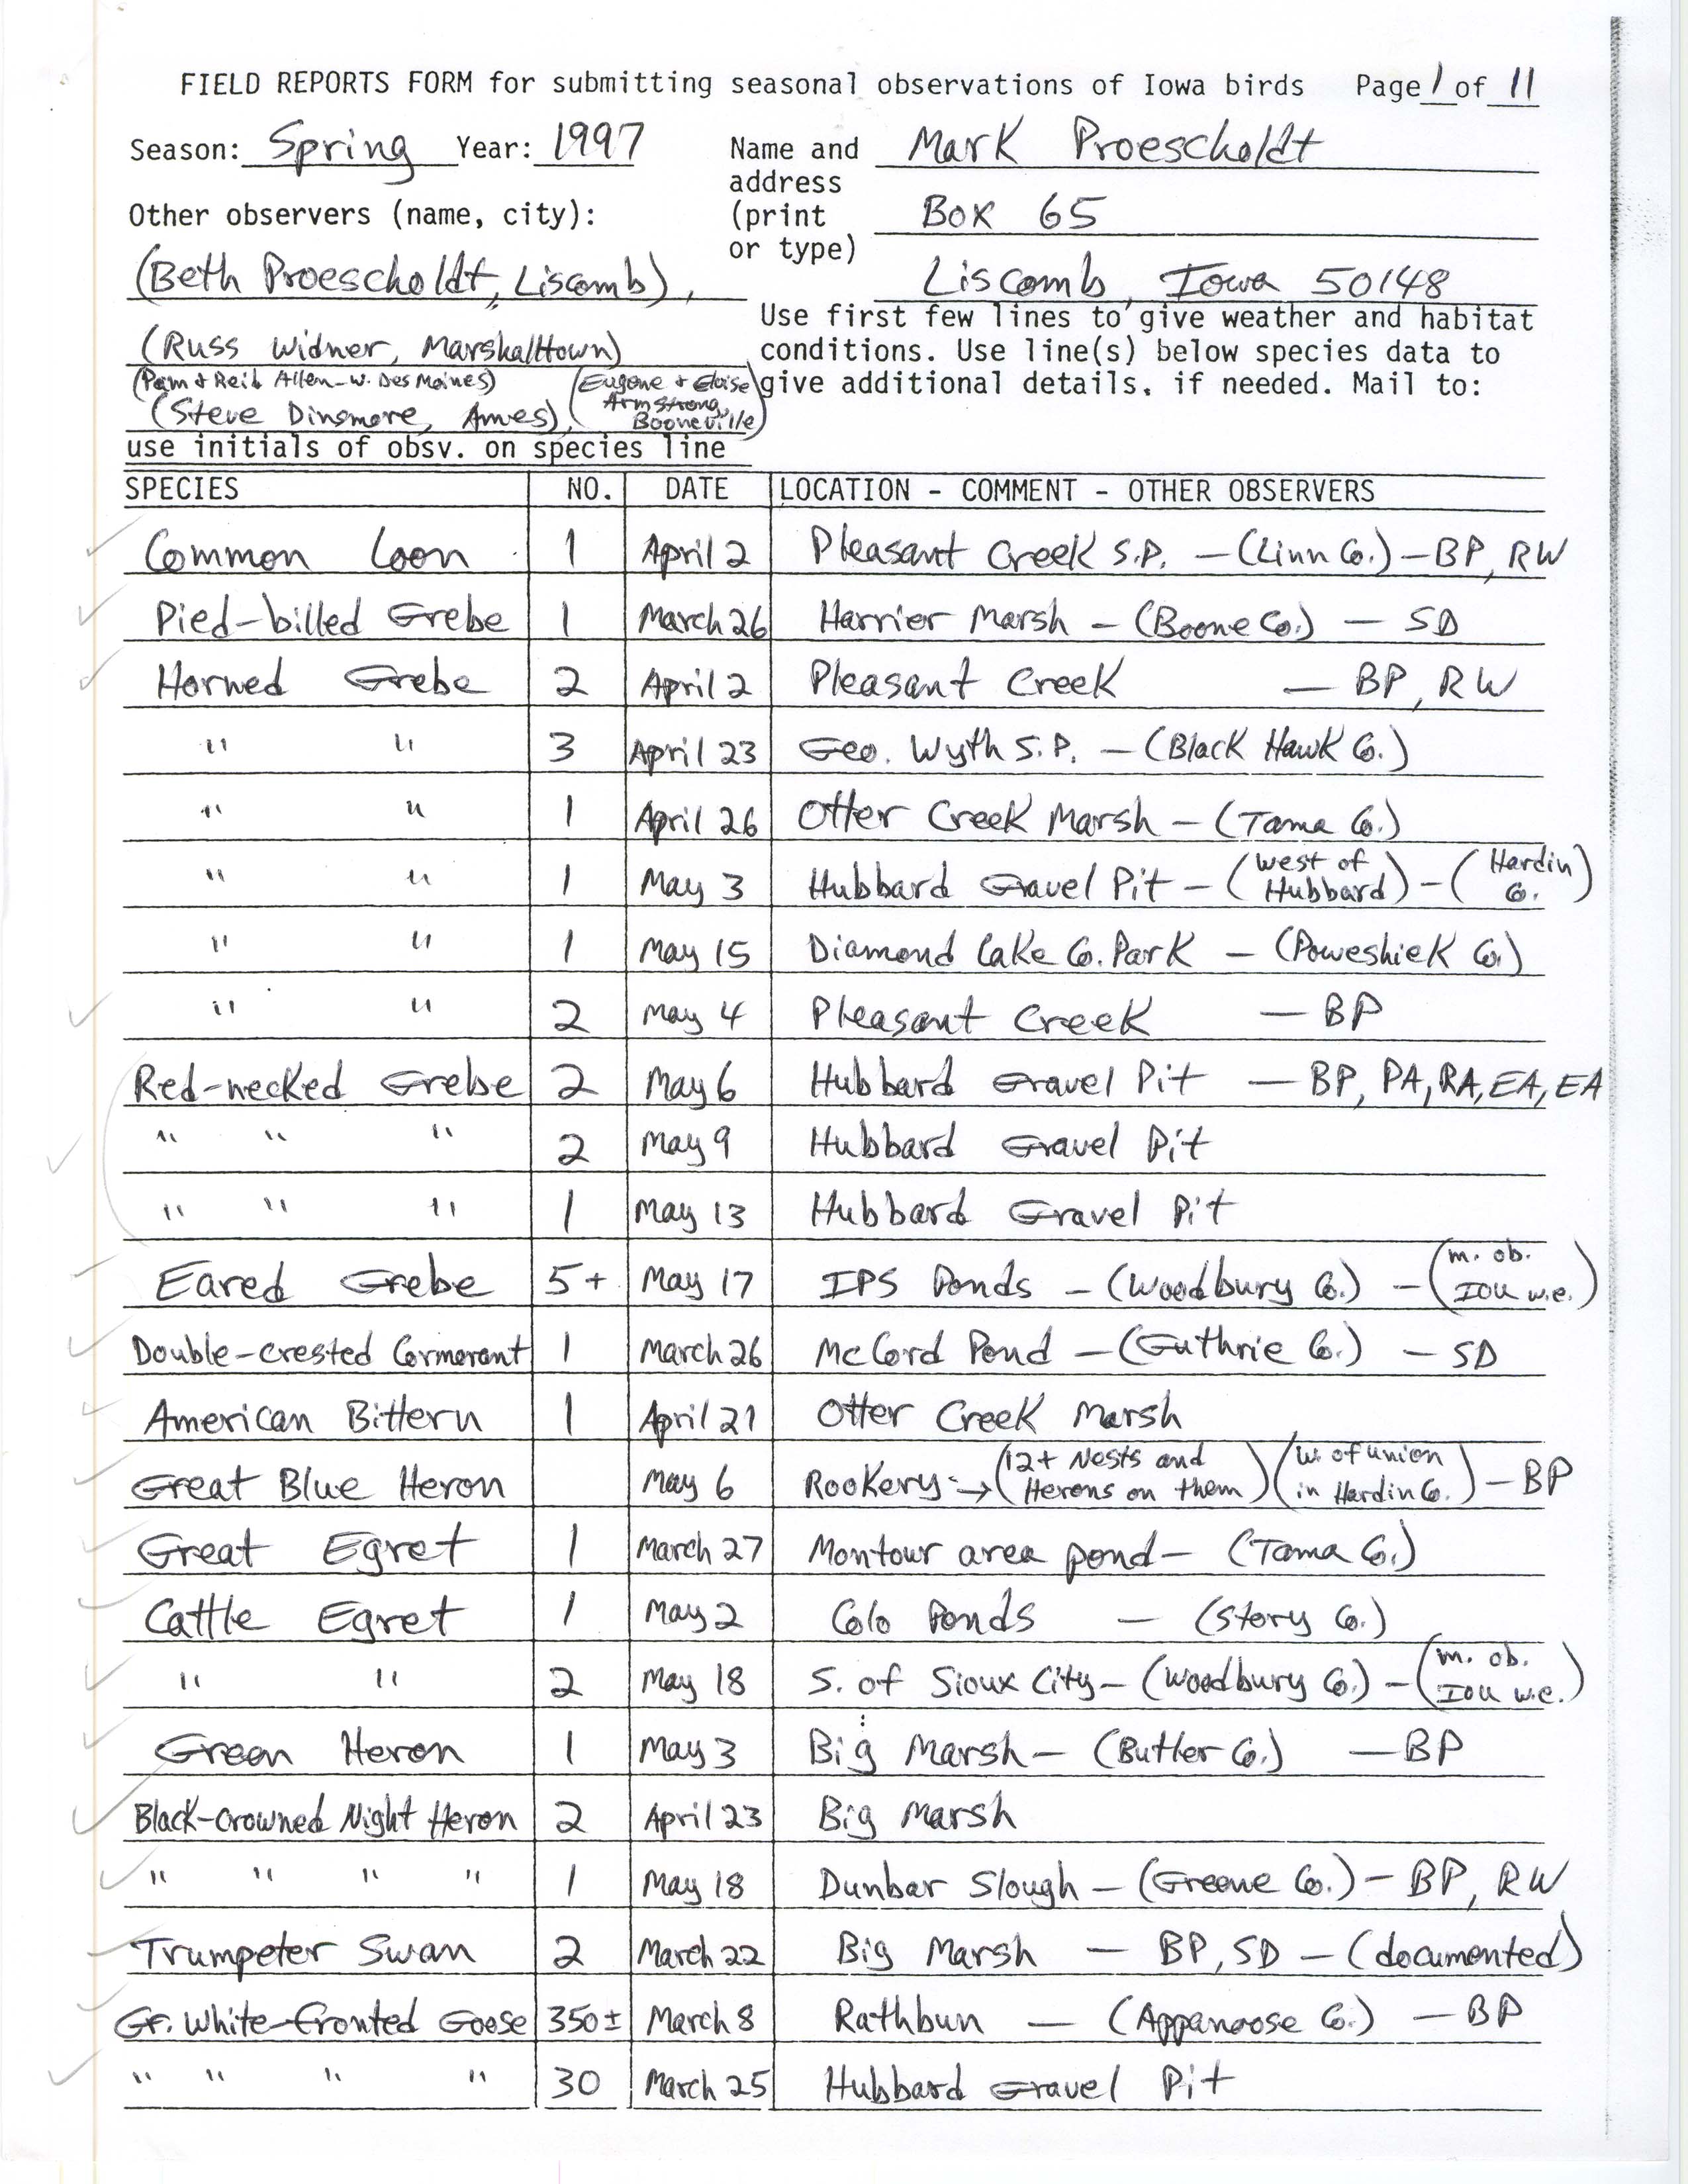 Field reports form for submitting seasonal observations of Iowa birds, Mark Proescholdt, spring 1997